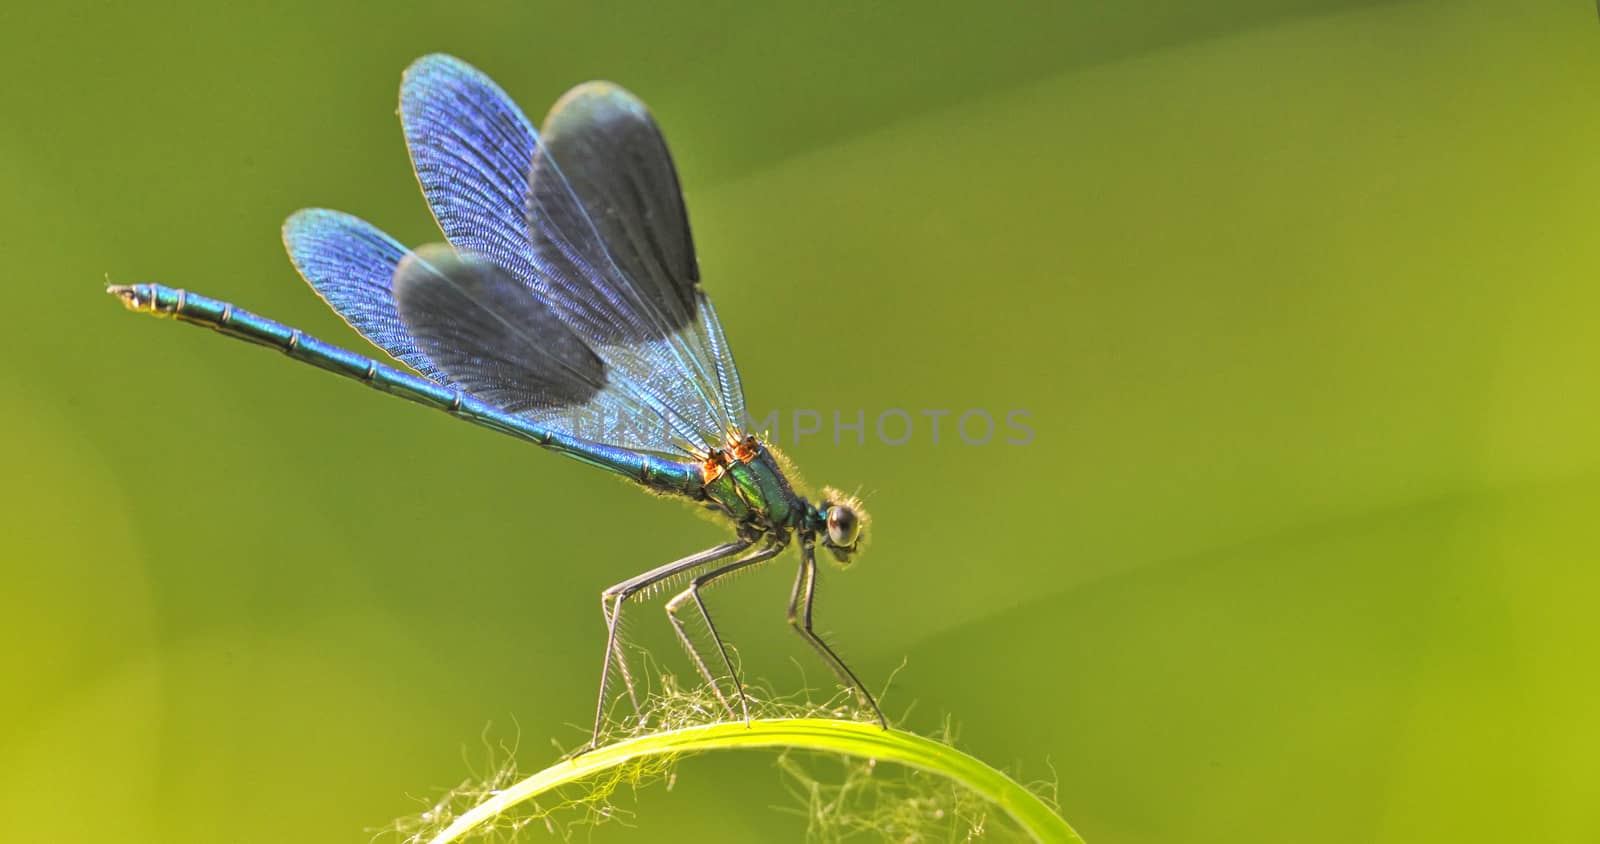 dragon fly on a blade of grass by mady70